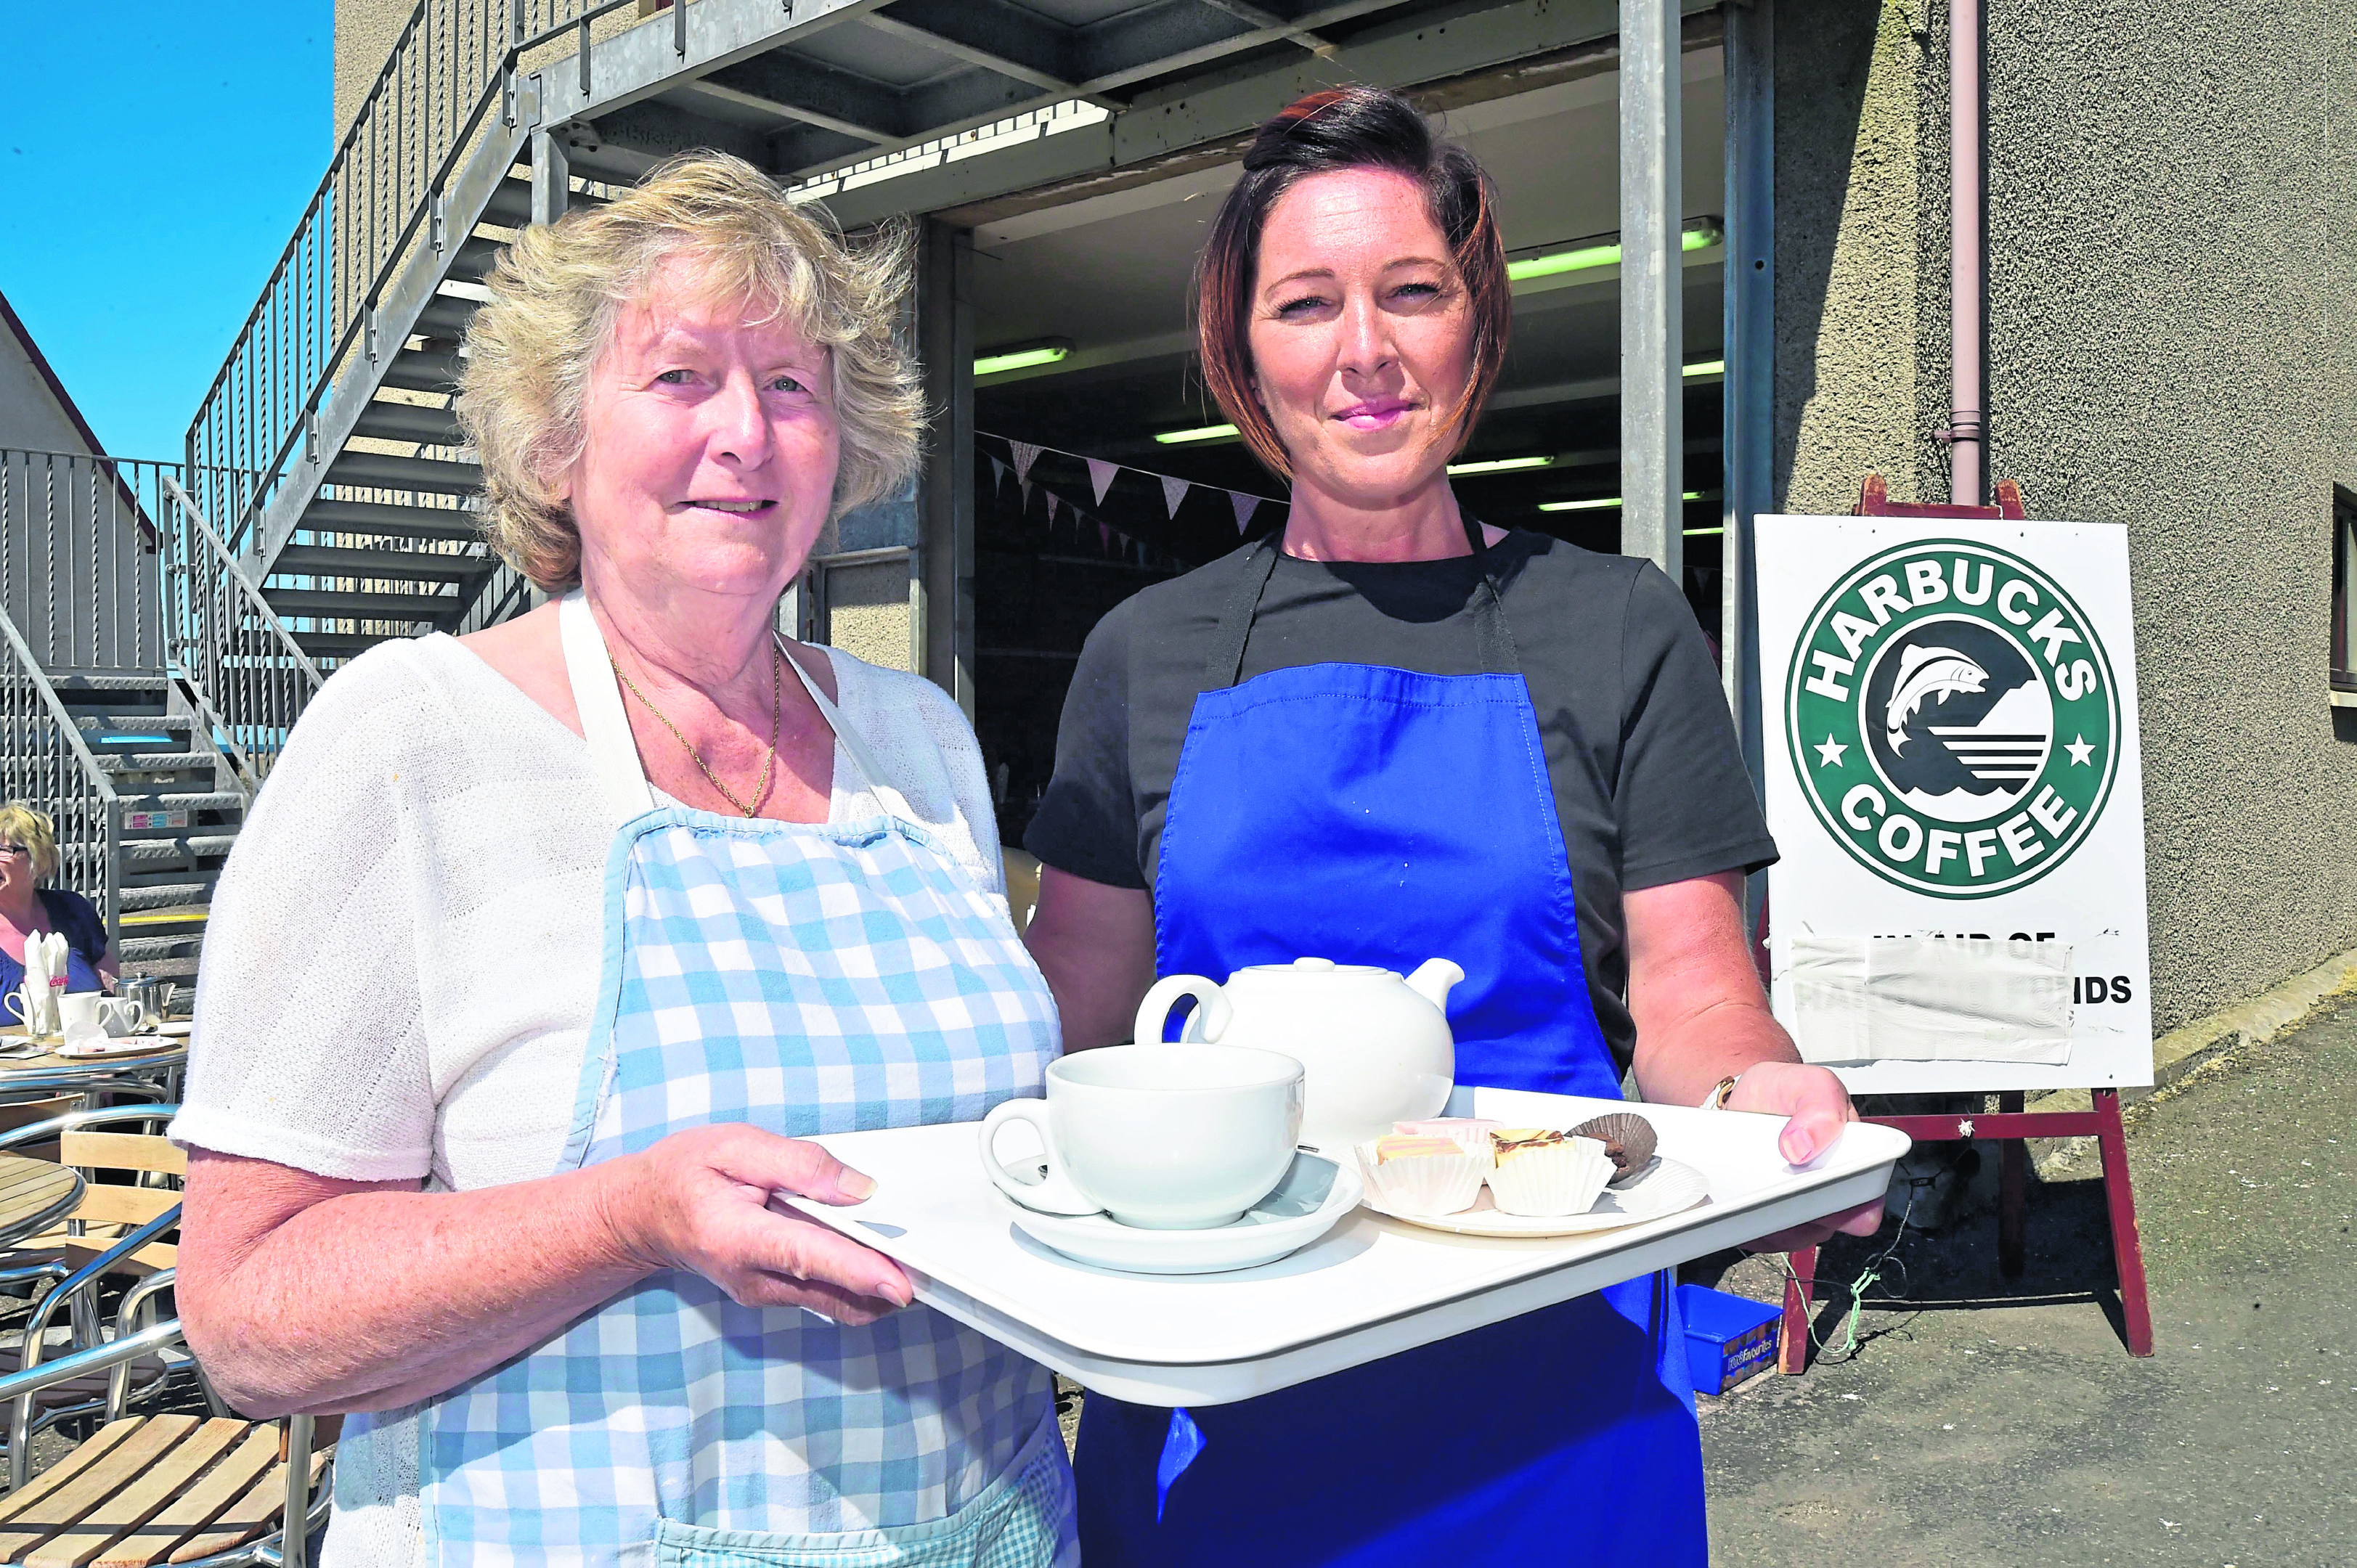 Volunteer Betty Jack, left, with support worker Ashley Runcie ready to serve customers at the cafe.